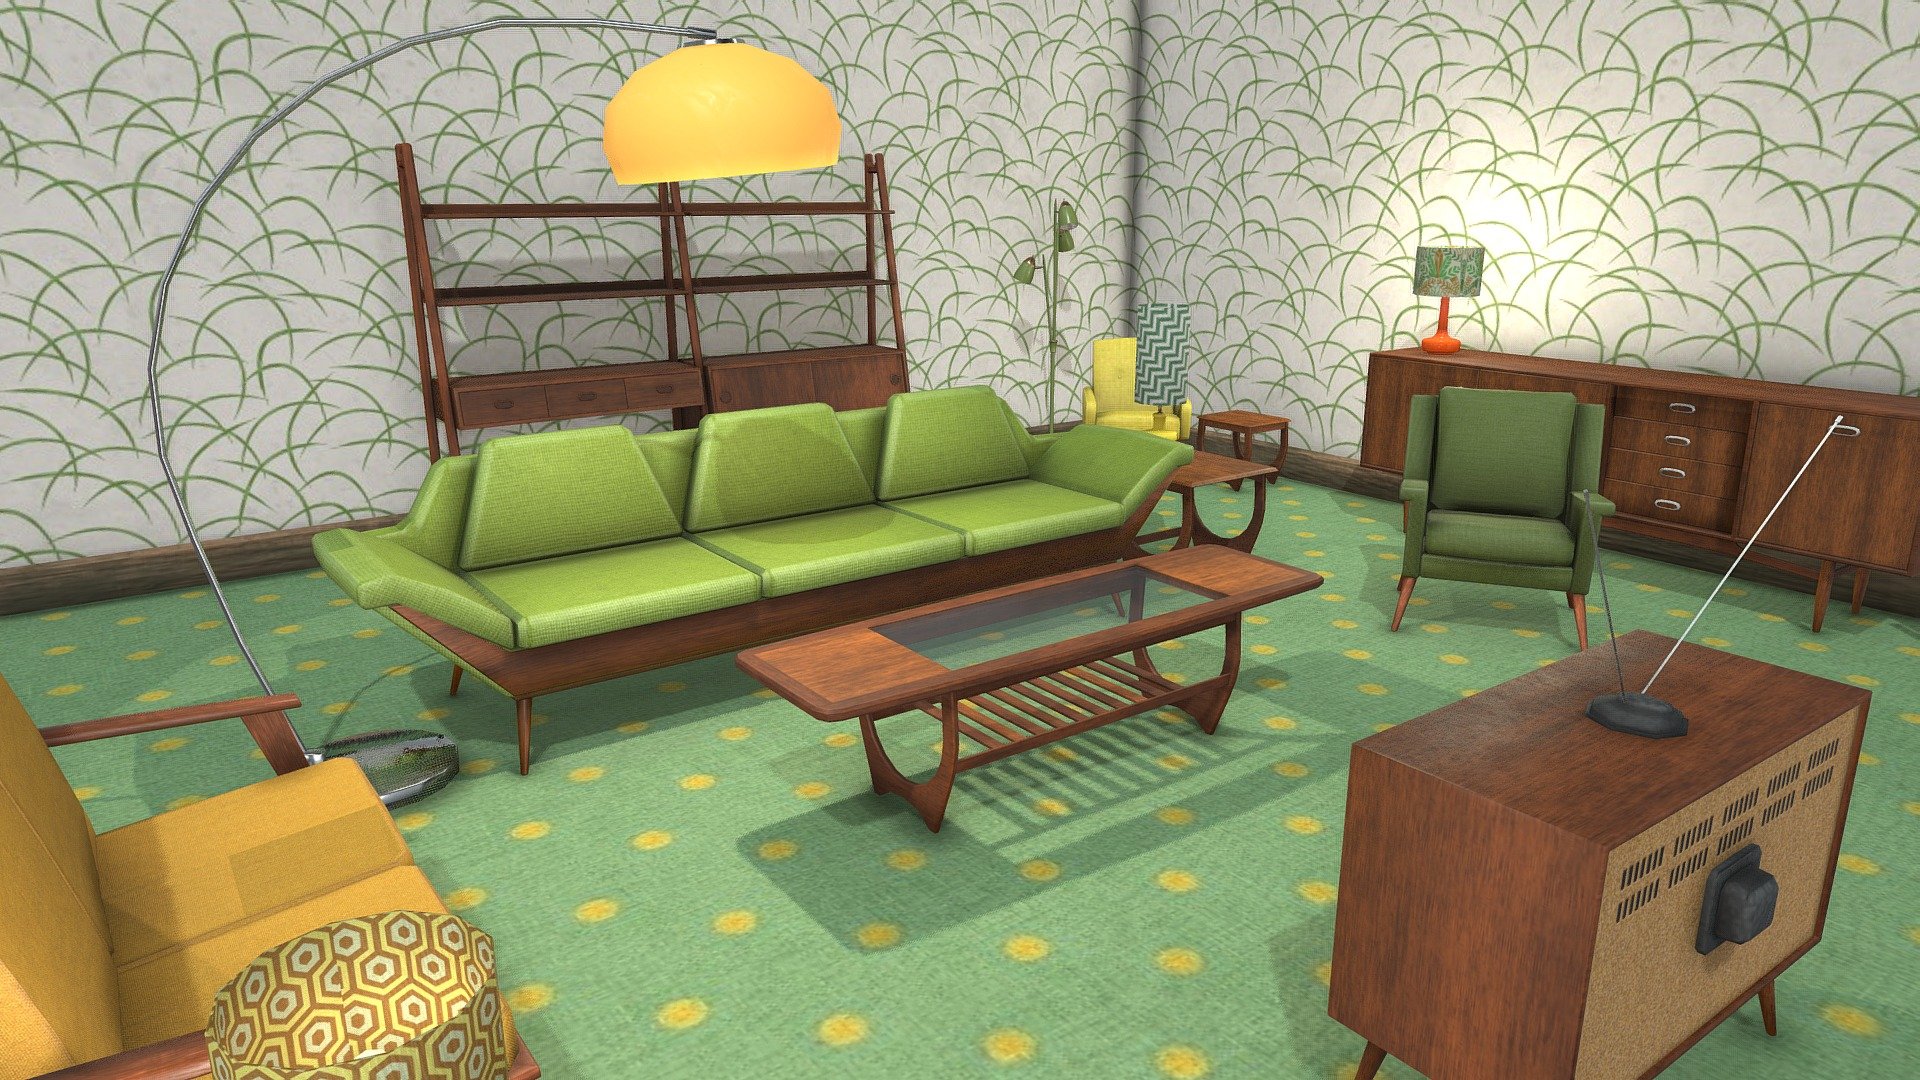 Retro - Living Room - Low Poly - Furniture Pack